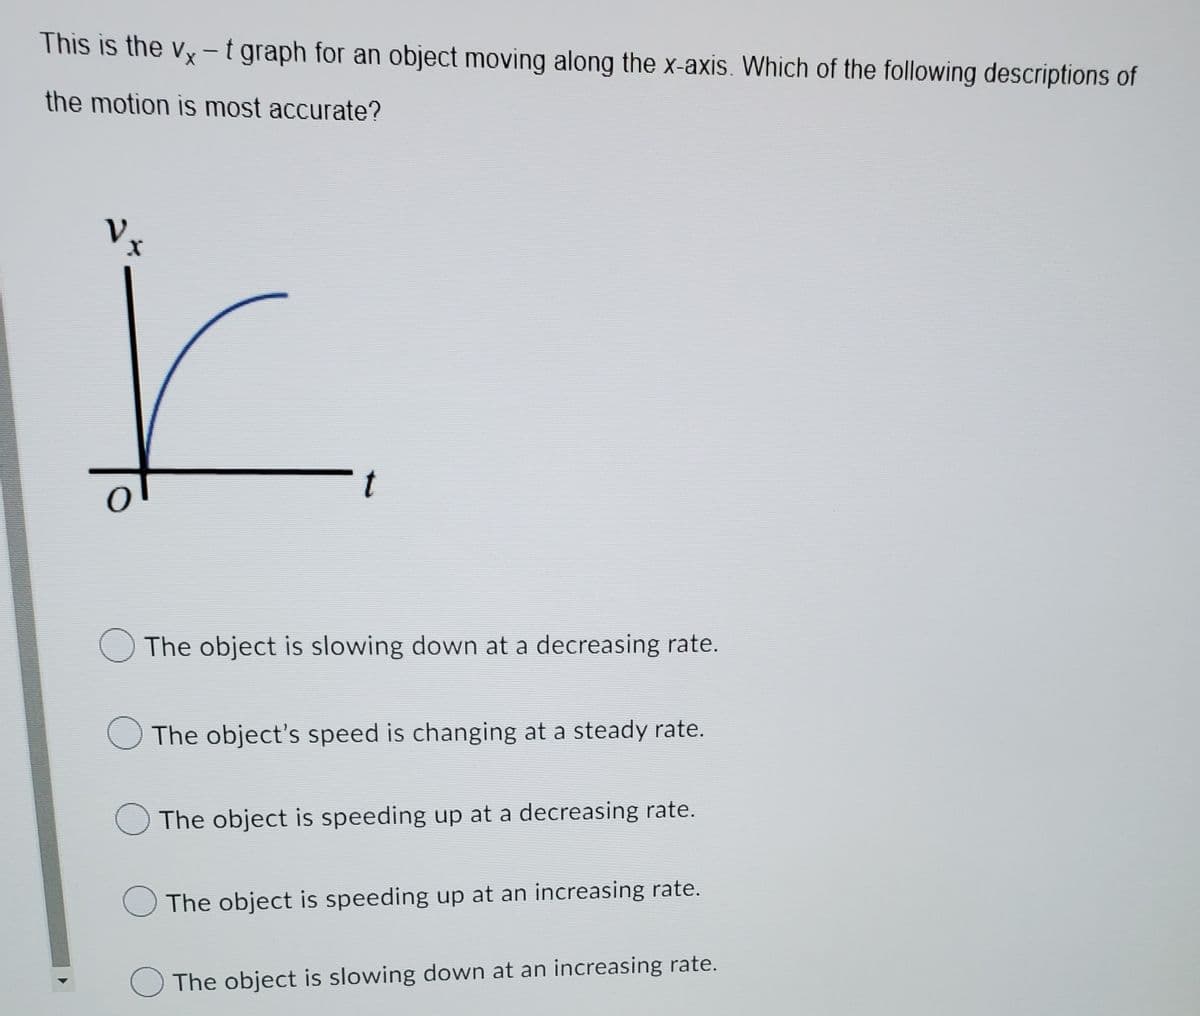 This is the vy-t graph for an object moving along the x-axis. Which of the following descriptions of
the motion is most accurate?
Vx
t
O The object is slowing down at a decreasing rate.
The object's speed is changing at a steady rate.
OThe object is speeding up at a decreasing rate.
O The object is speeding up at an increasing rate.
The object is slowing down at an increasing rate.
